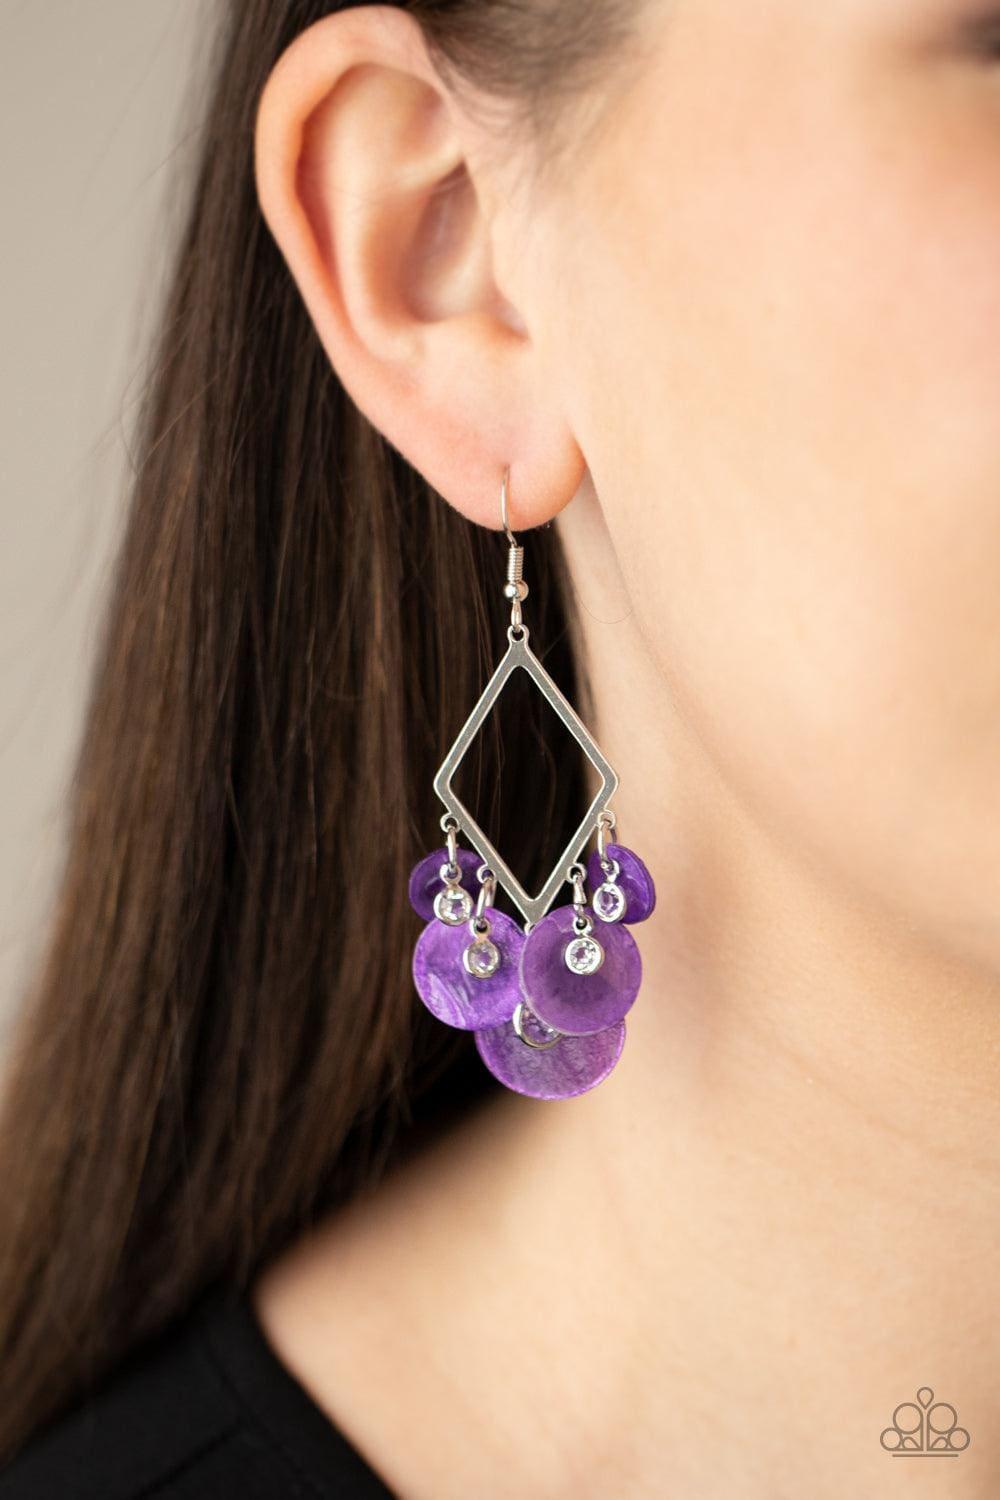 Paparazzi Accessories - Pomp And Circumstance - Purple Earrings - Bling by JessieK